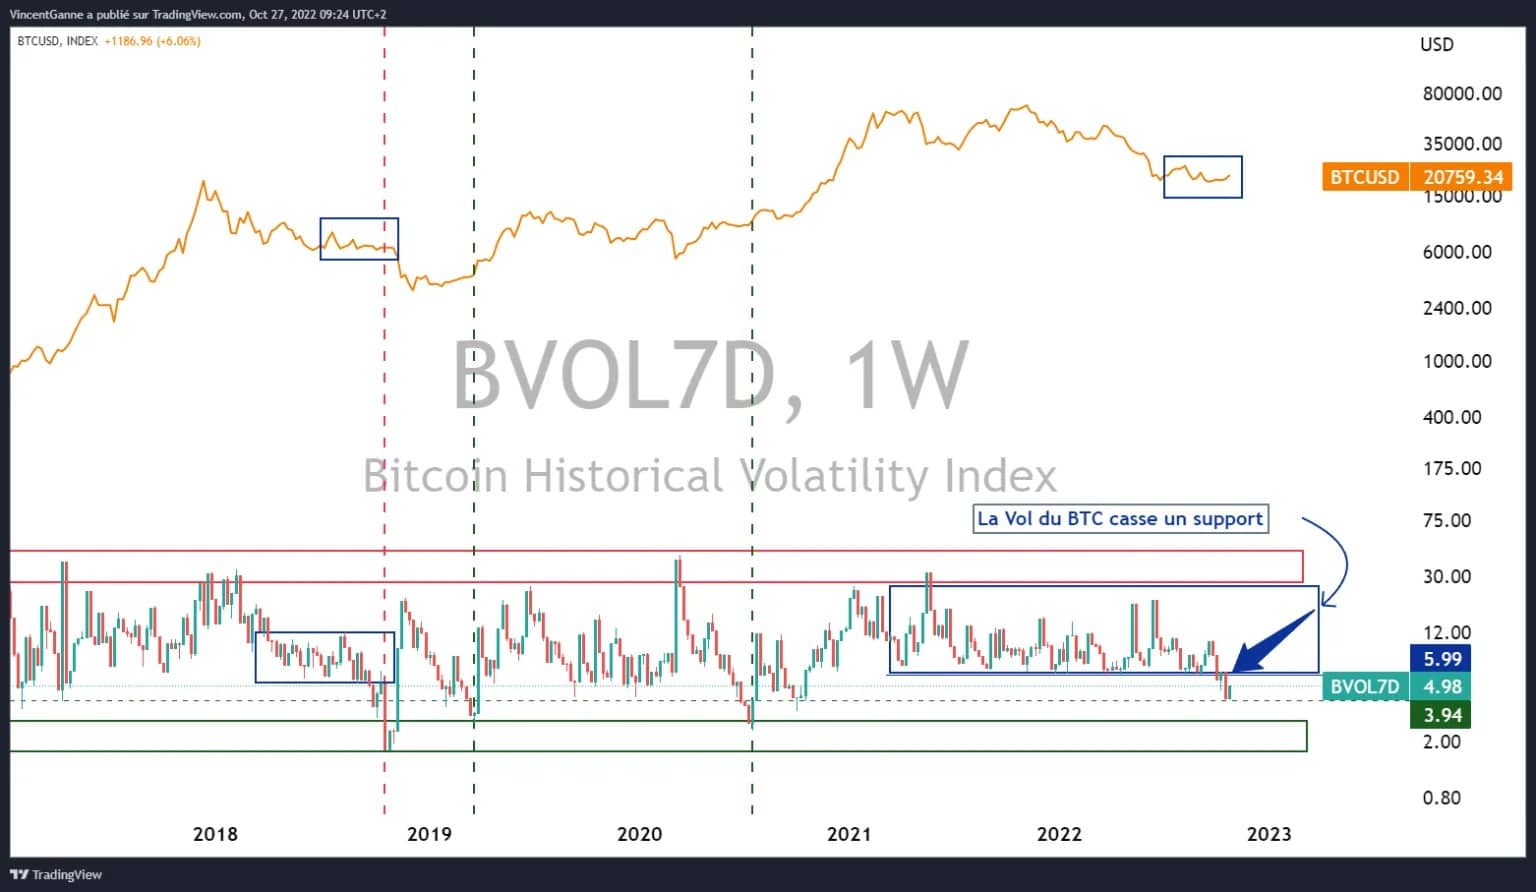 Bitcoin's price compared to its 7-day historical volatility measure (bottom curve)